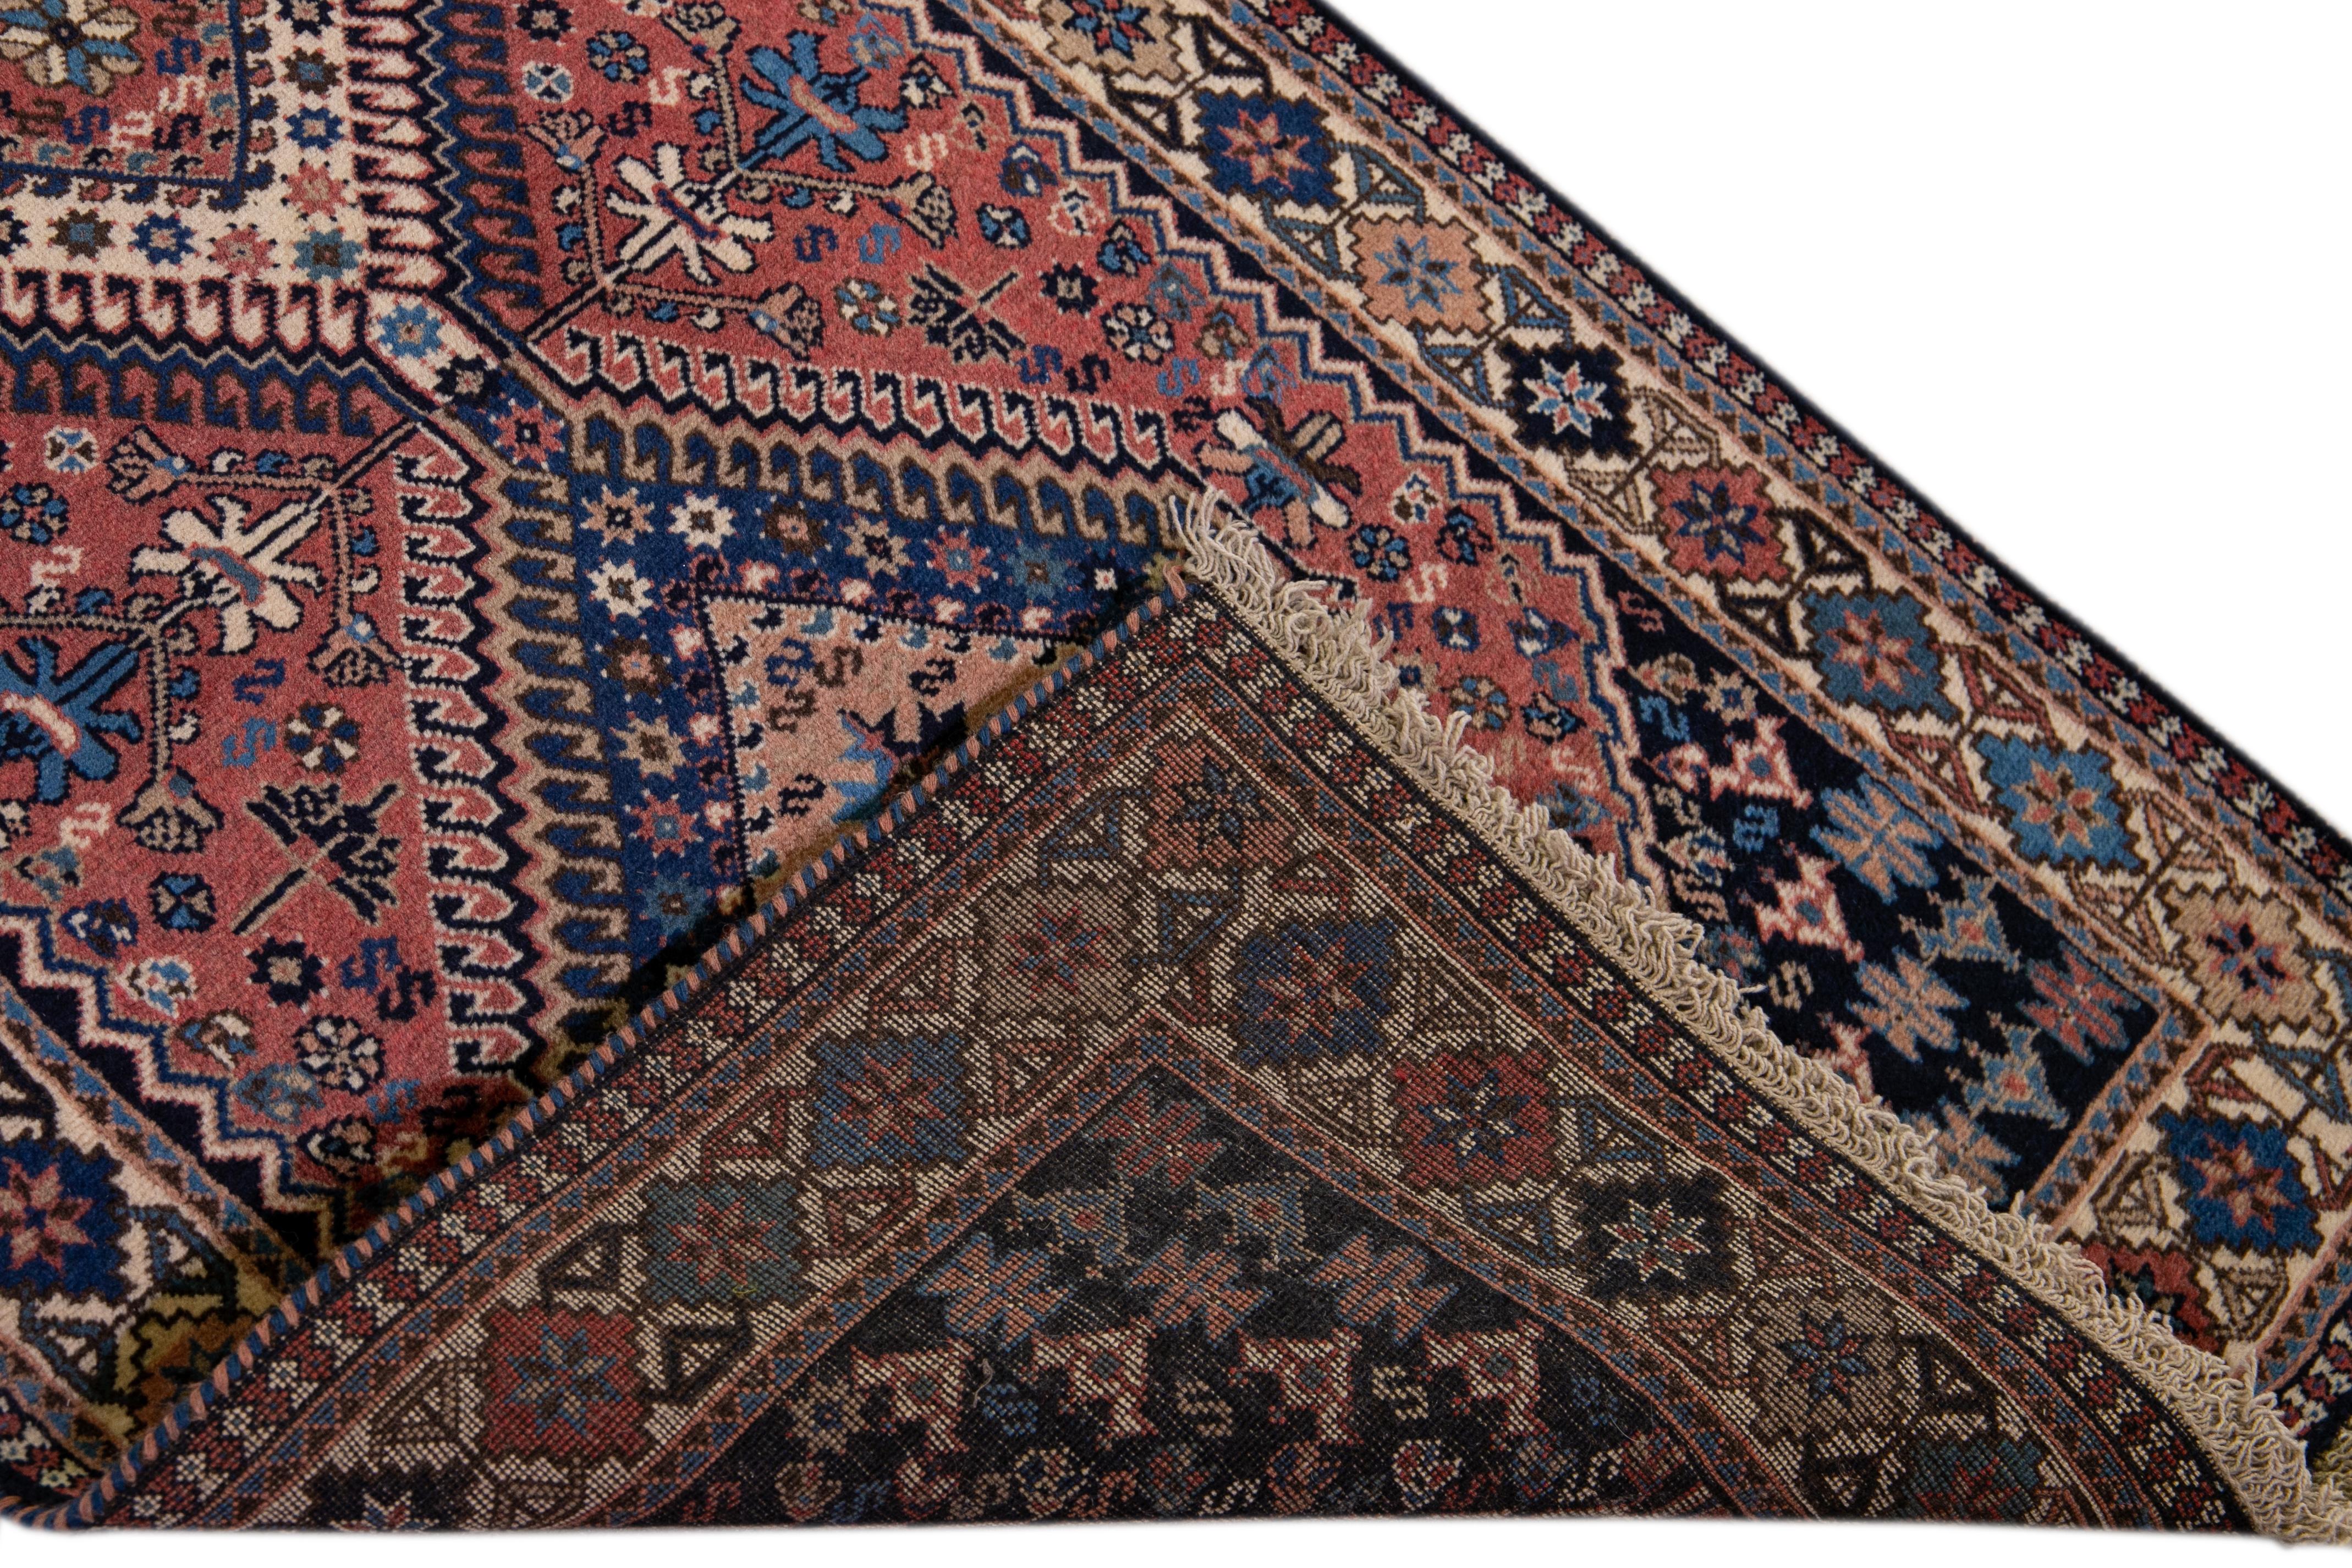 Beautiful hand-knotted vintage Bakhtiari wool runner. This rug has a rust field with a multicolored medallion geometric design all over,

This rug measures 2' 8